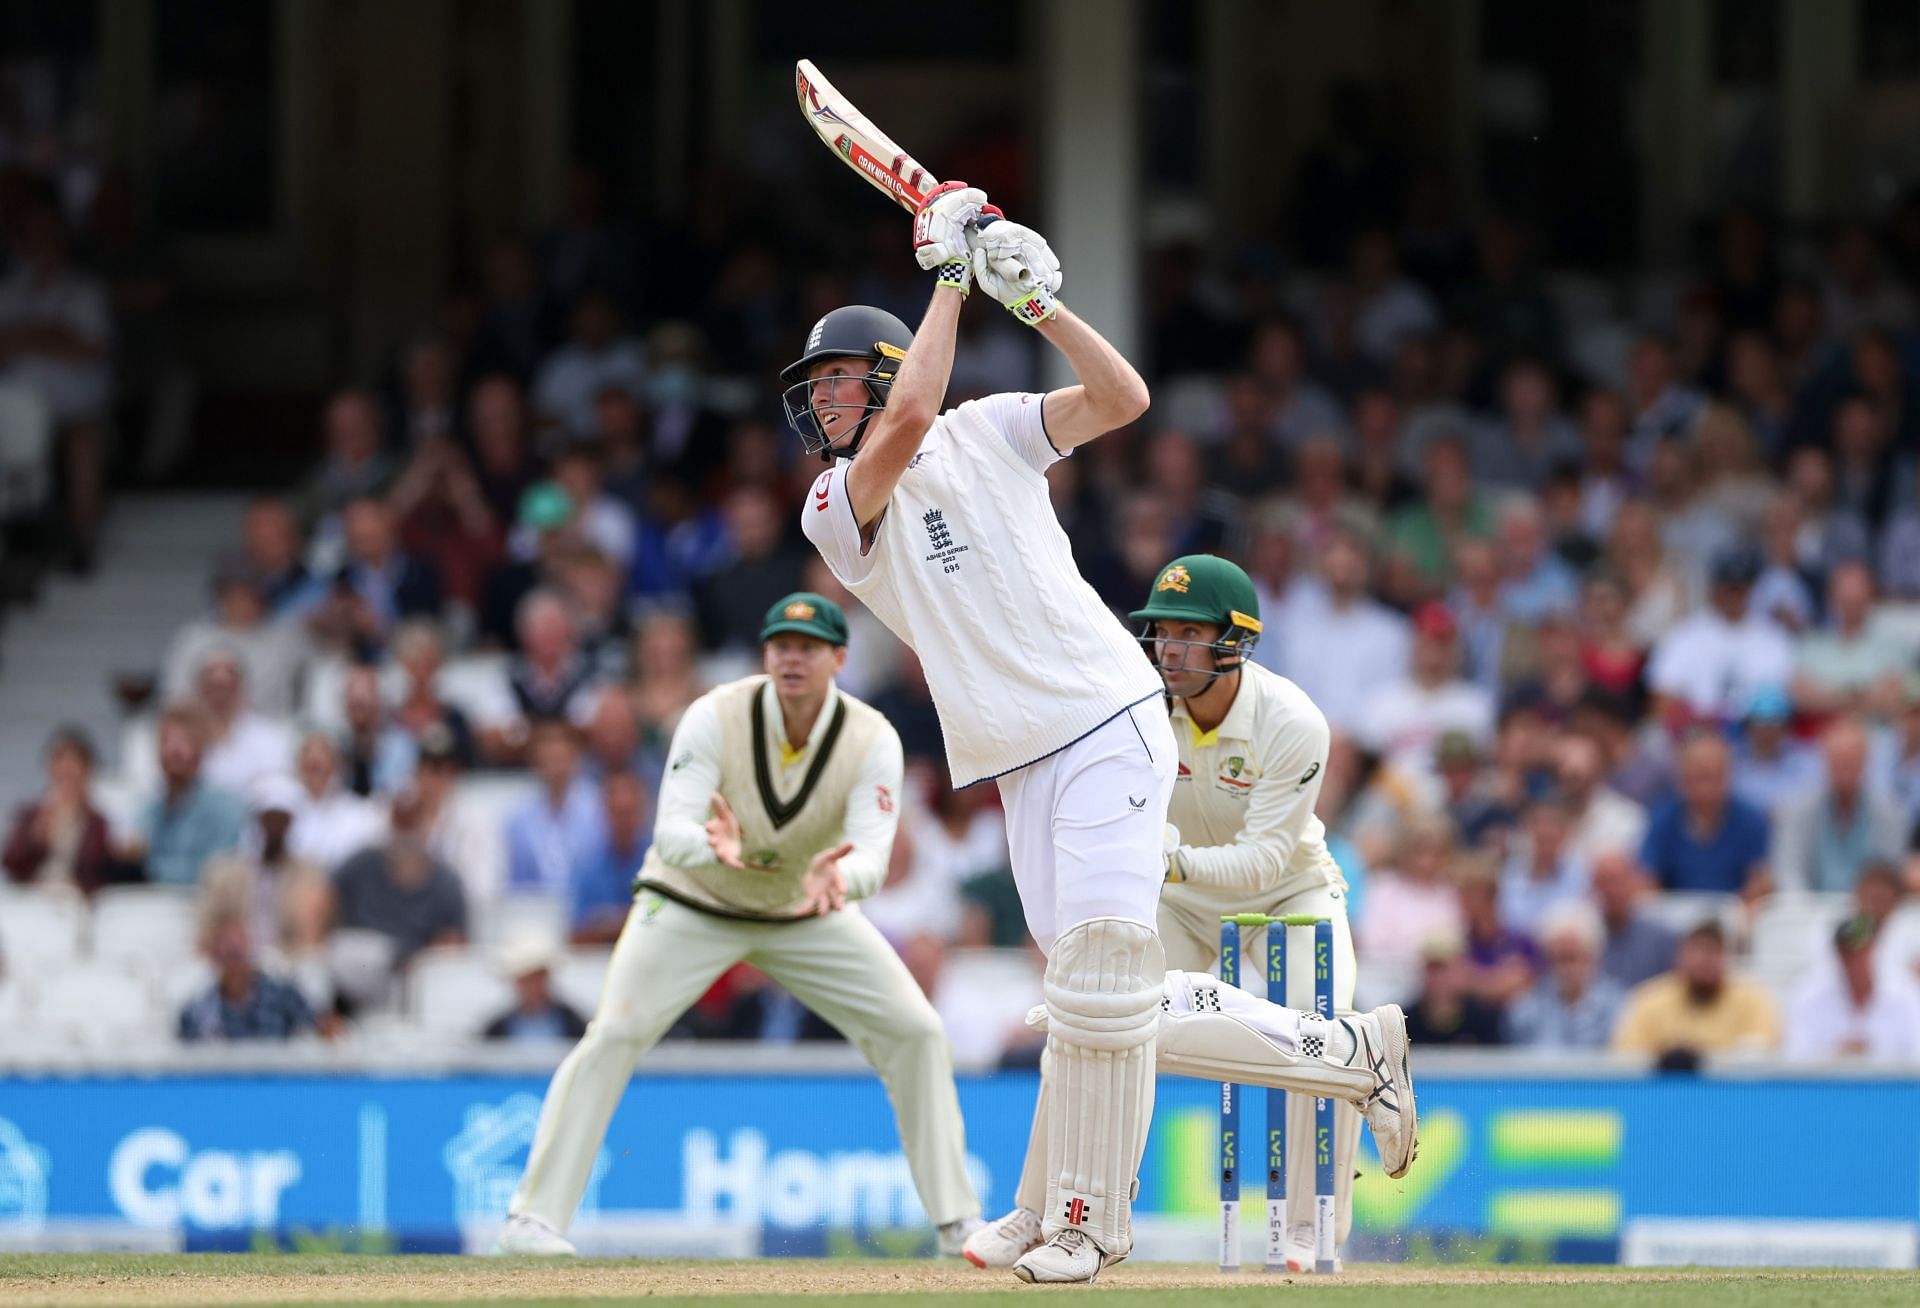 Zak Crawley lifted himself after some middling knocks. (Pic: Getty Images)